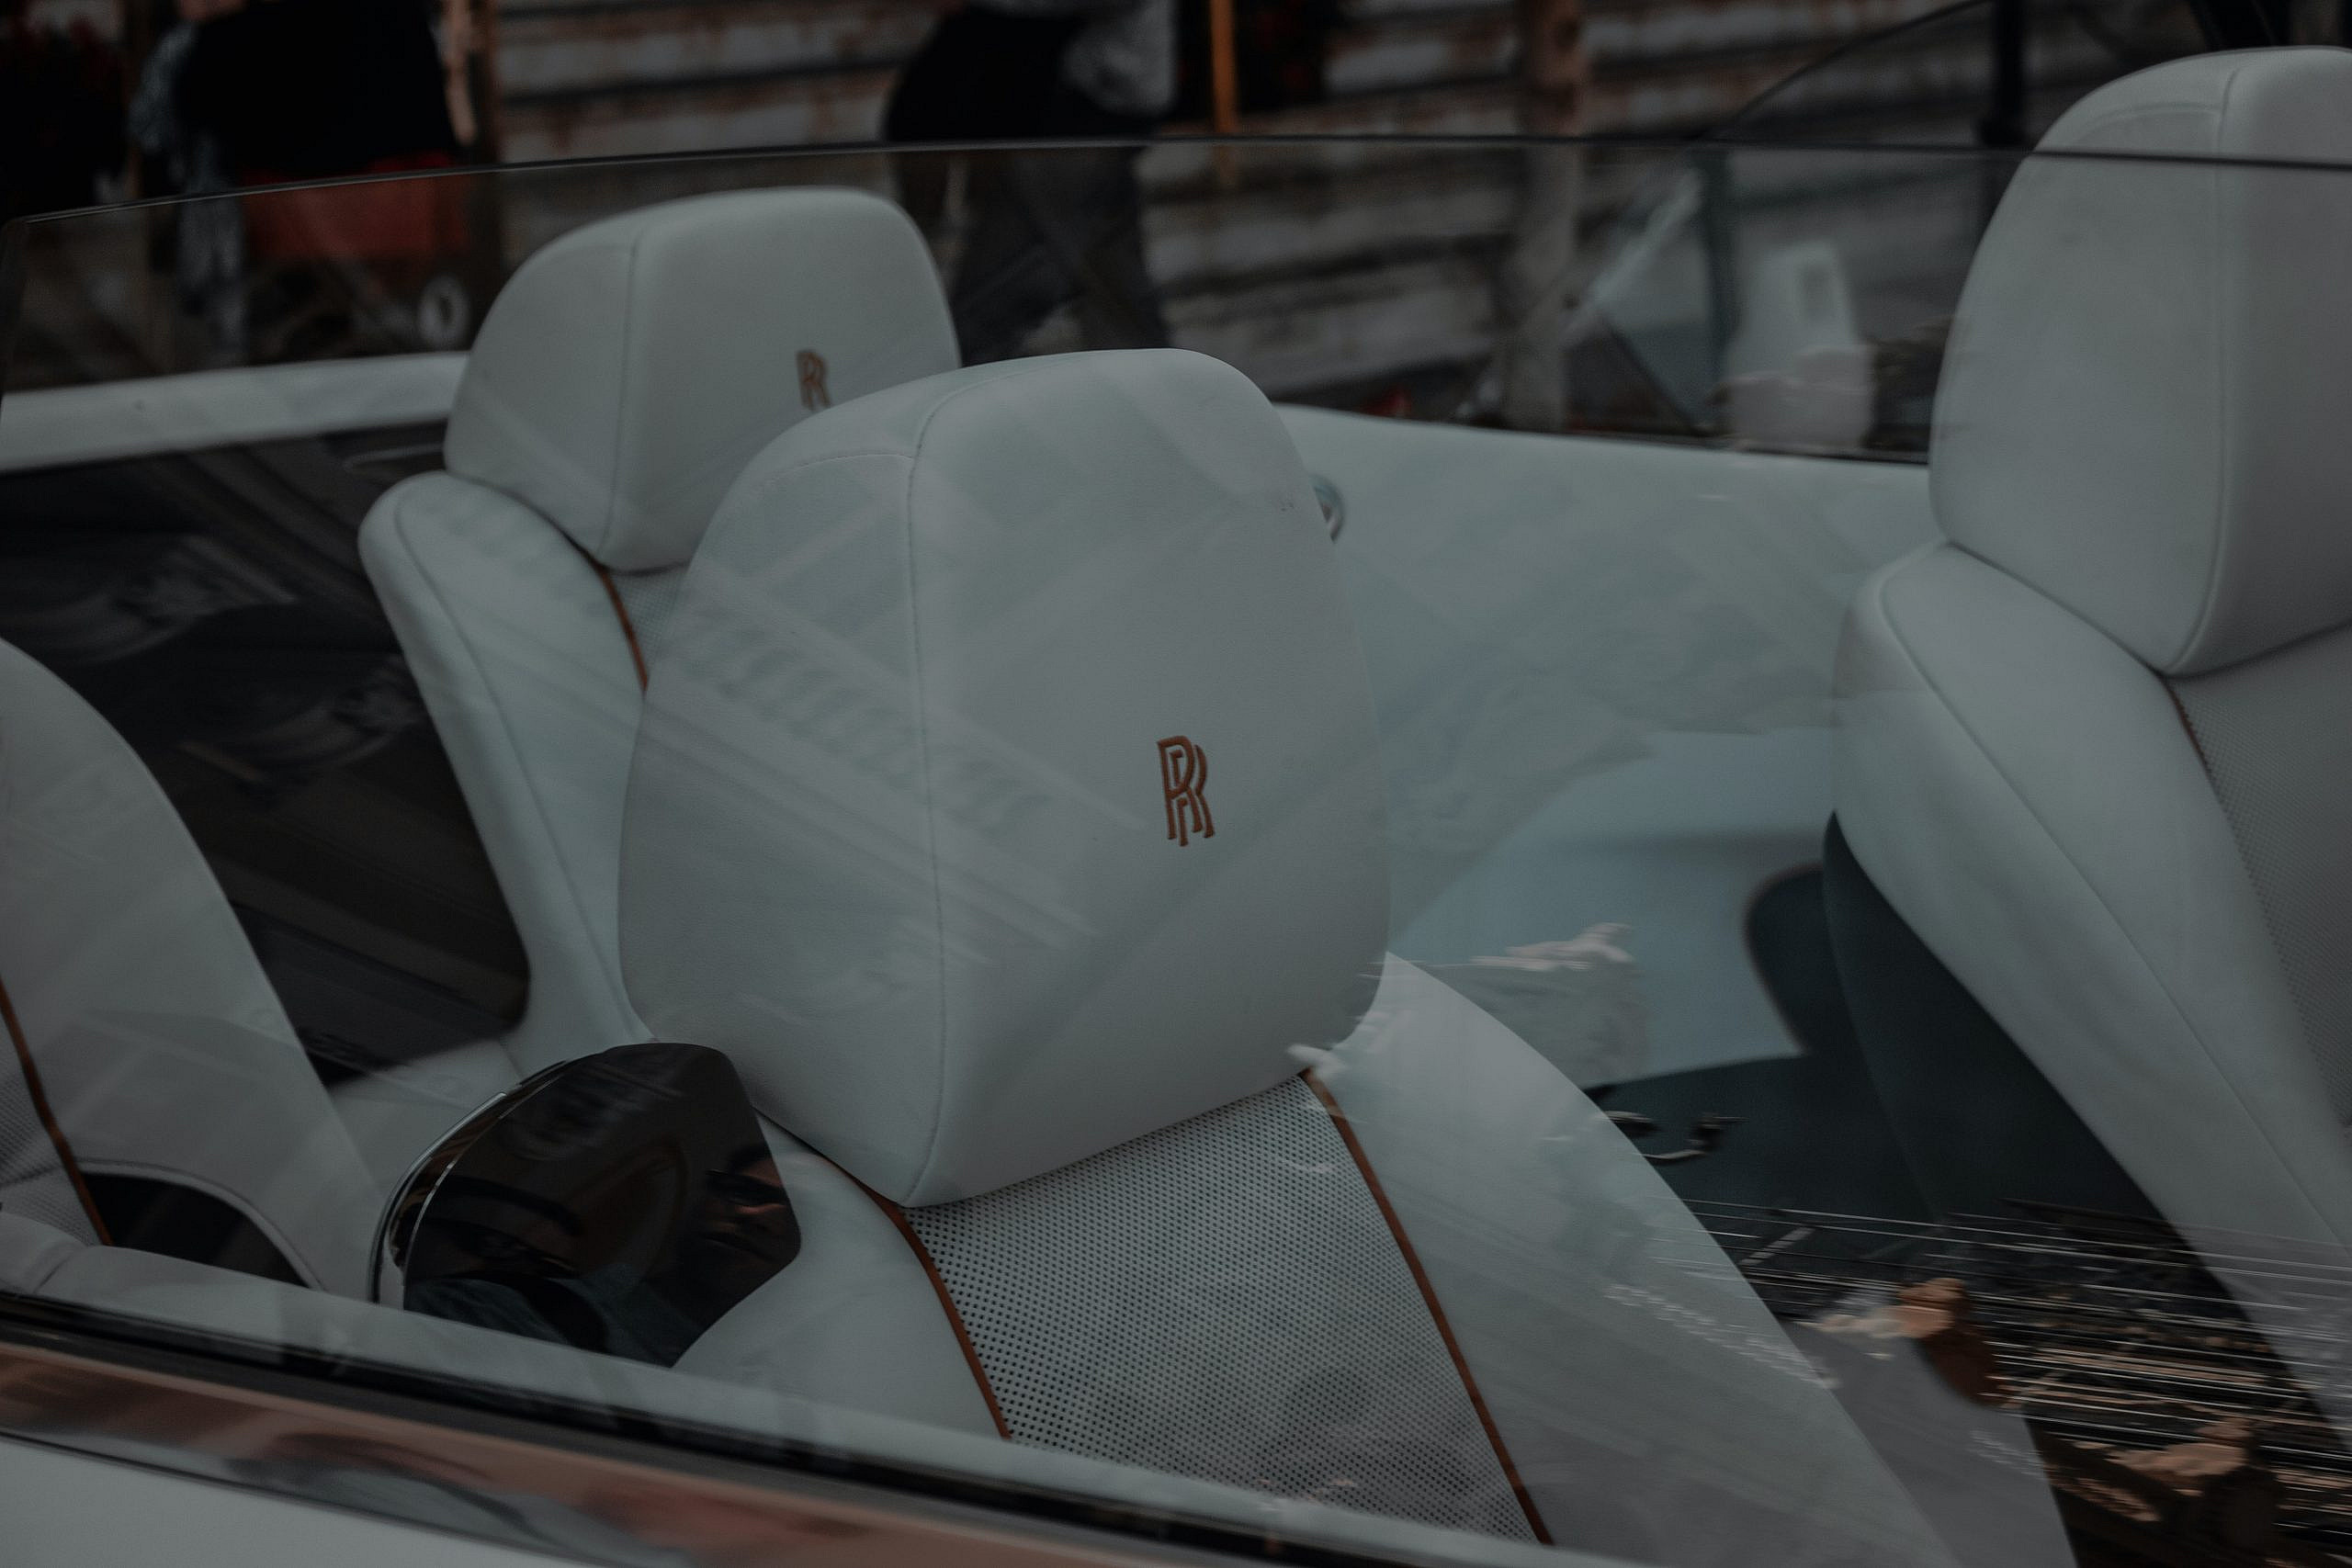 Rolls-Royce is the epitome of leather luxury